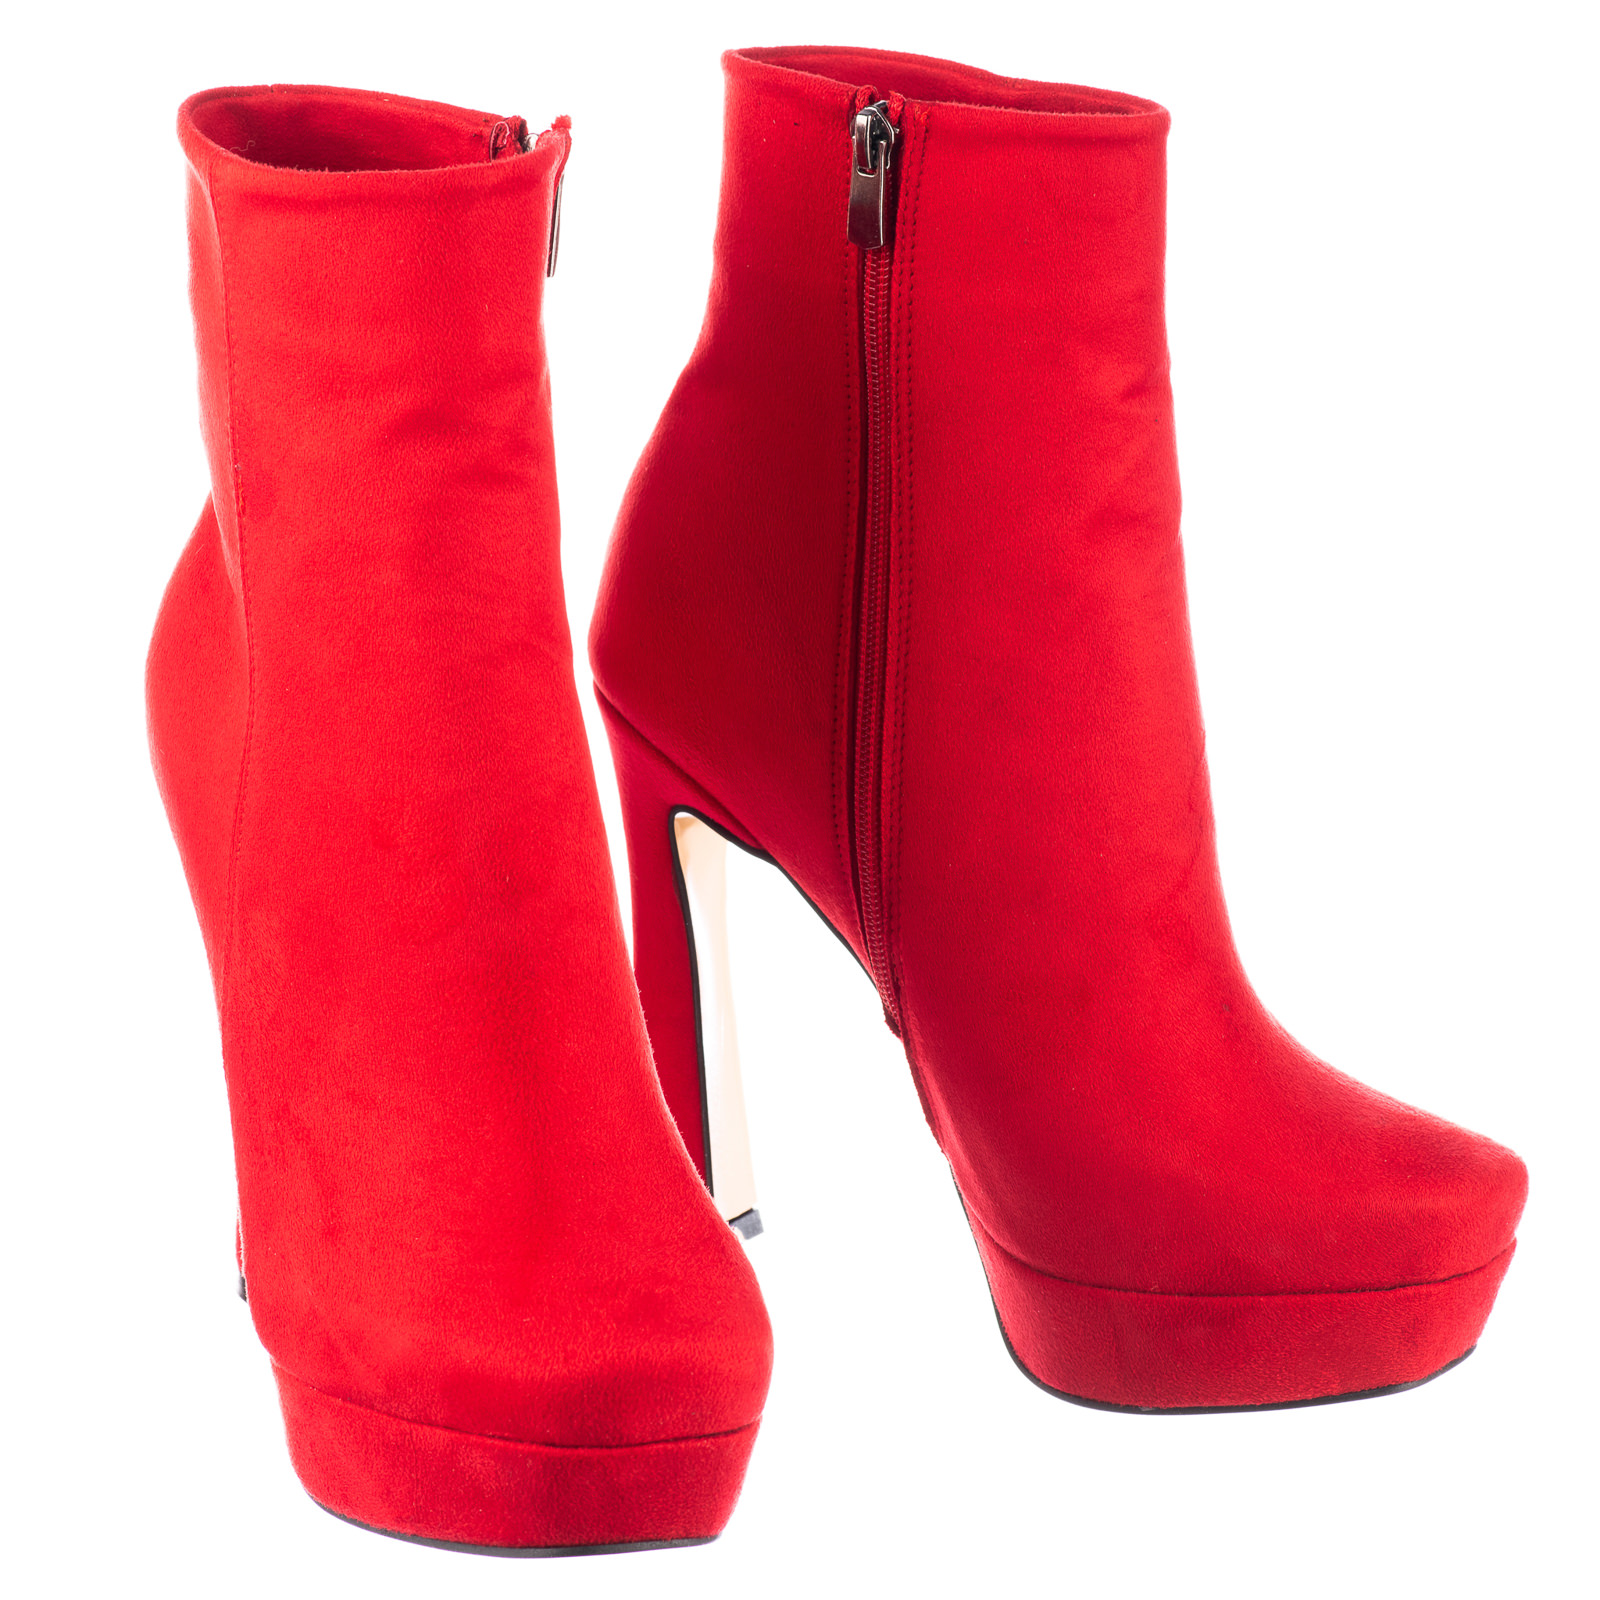 Women ankle boots B656 - RED